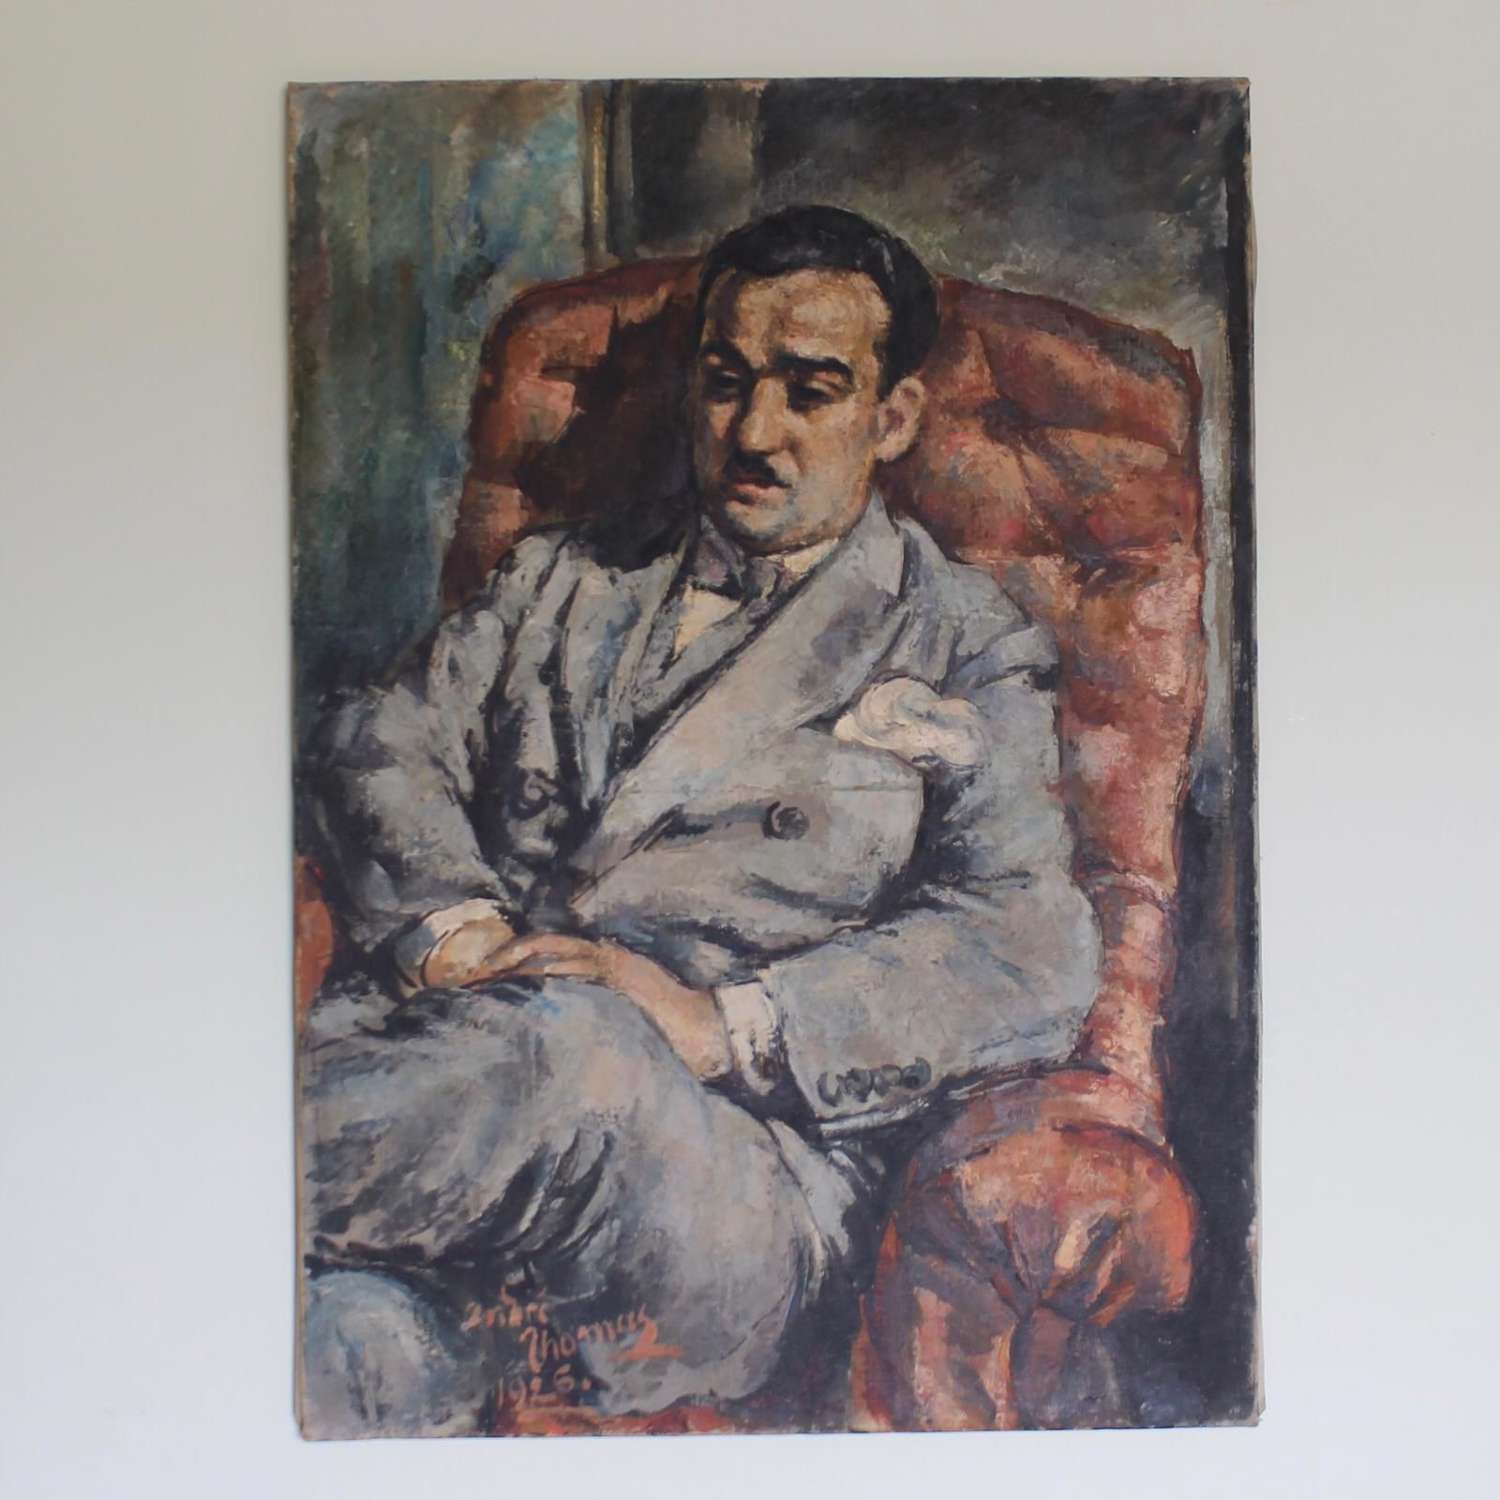 Portrait of a Seated Gentleman